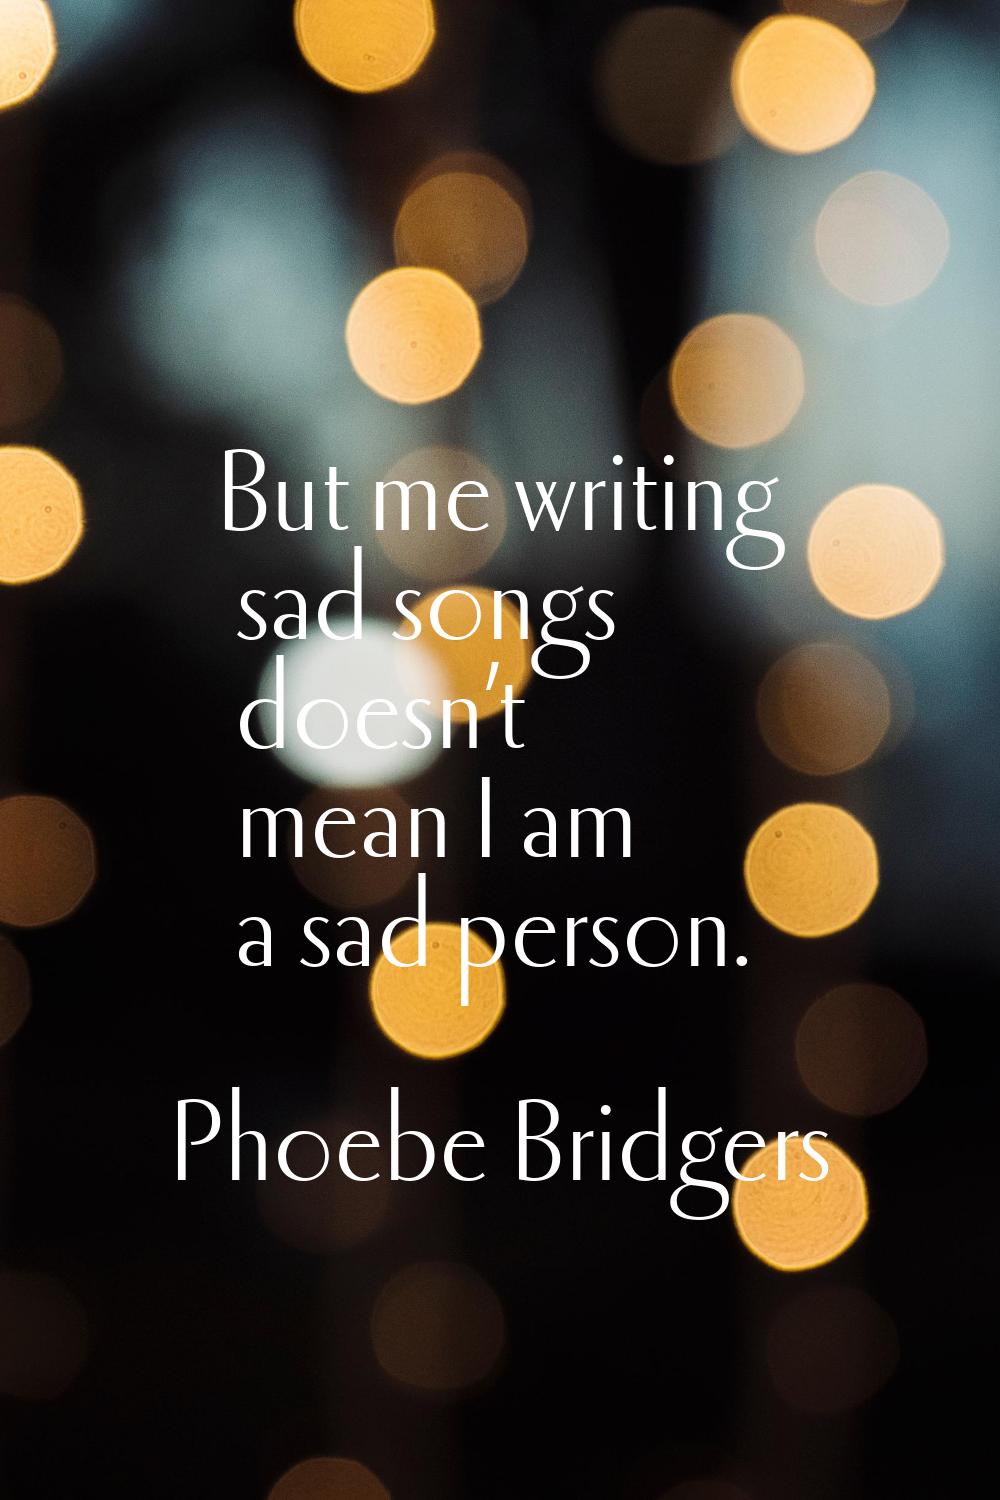 But me writing sad songs doesn’t mean I am a sad person.